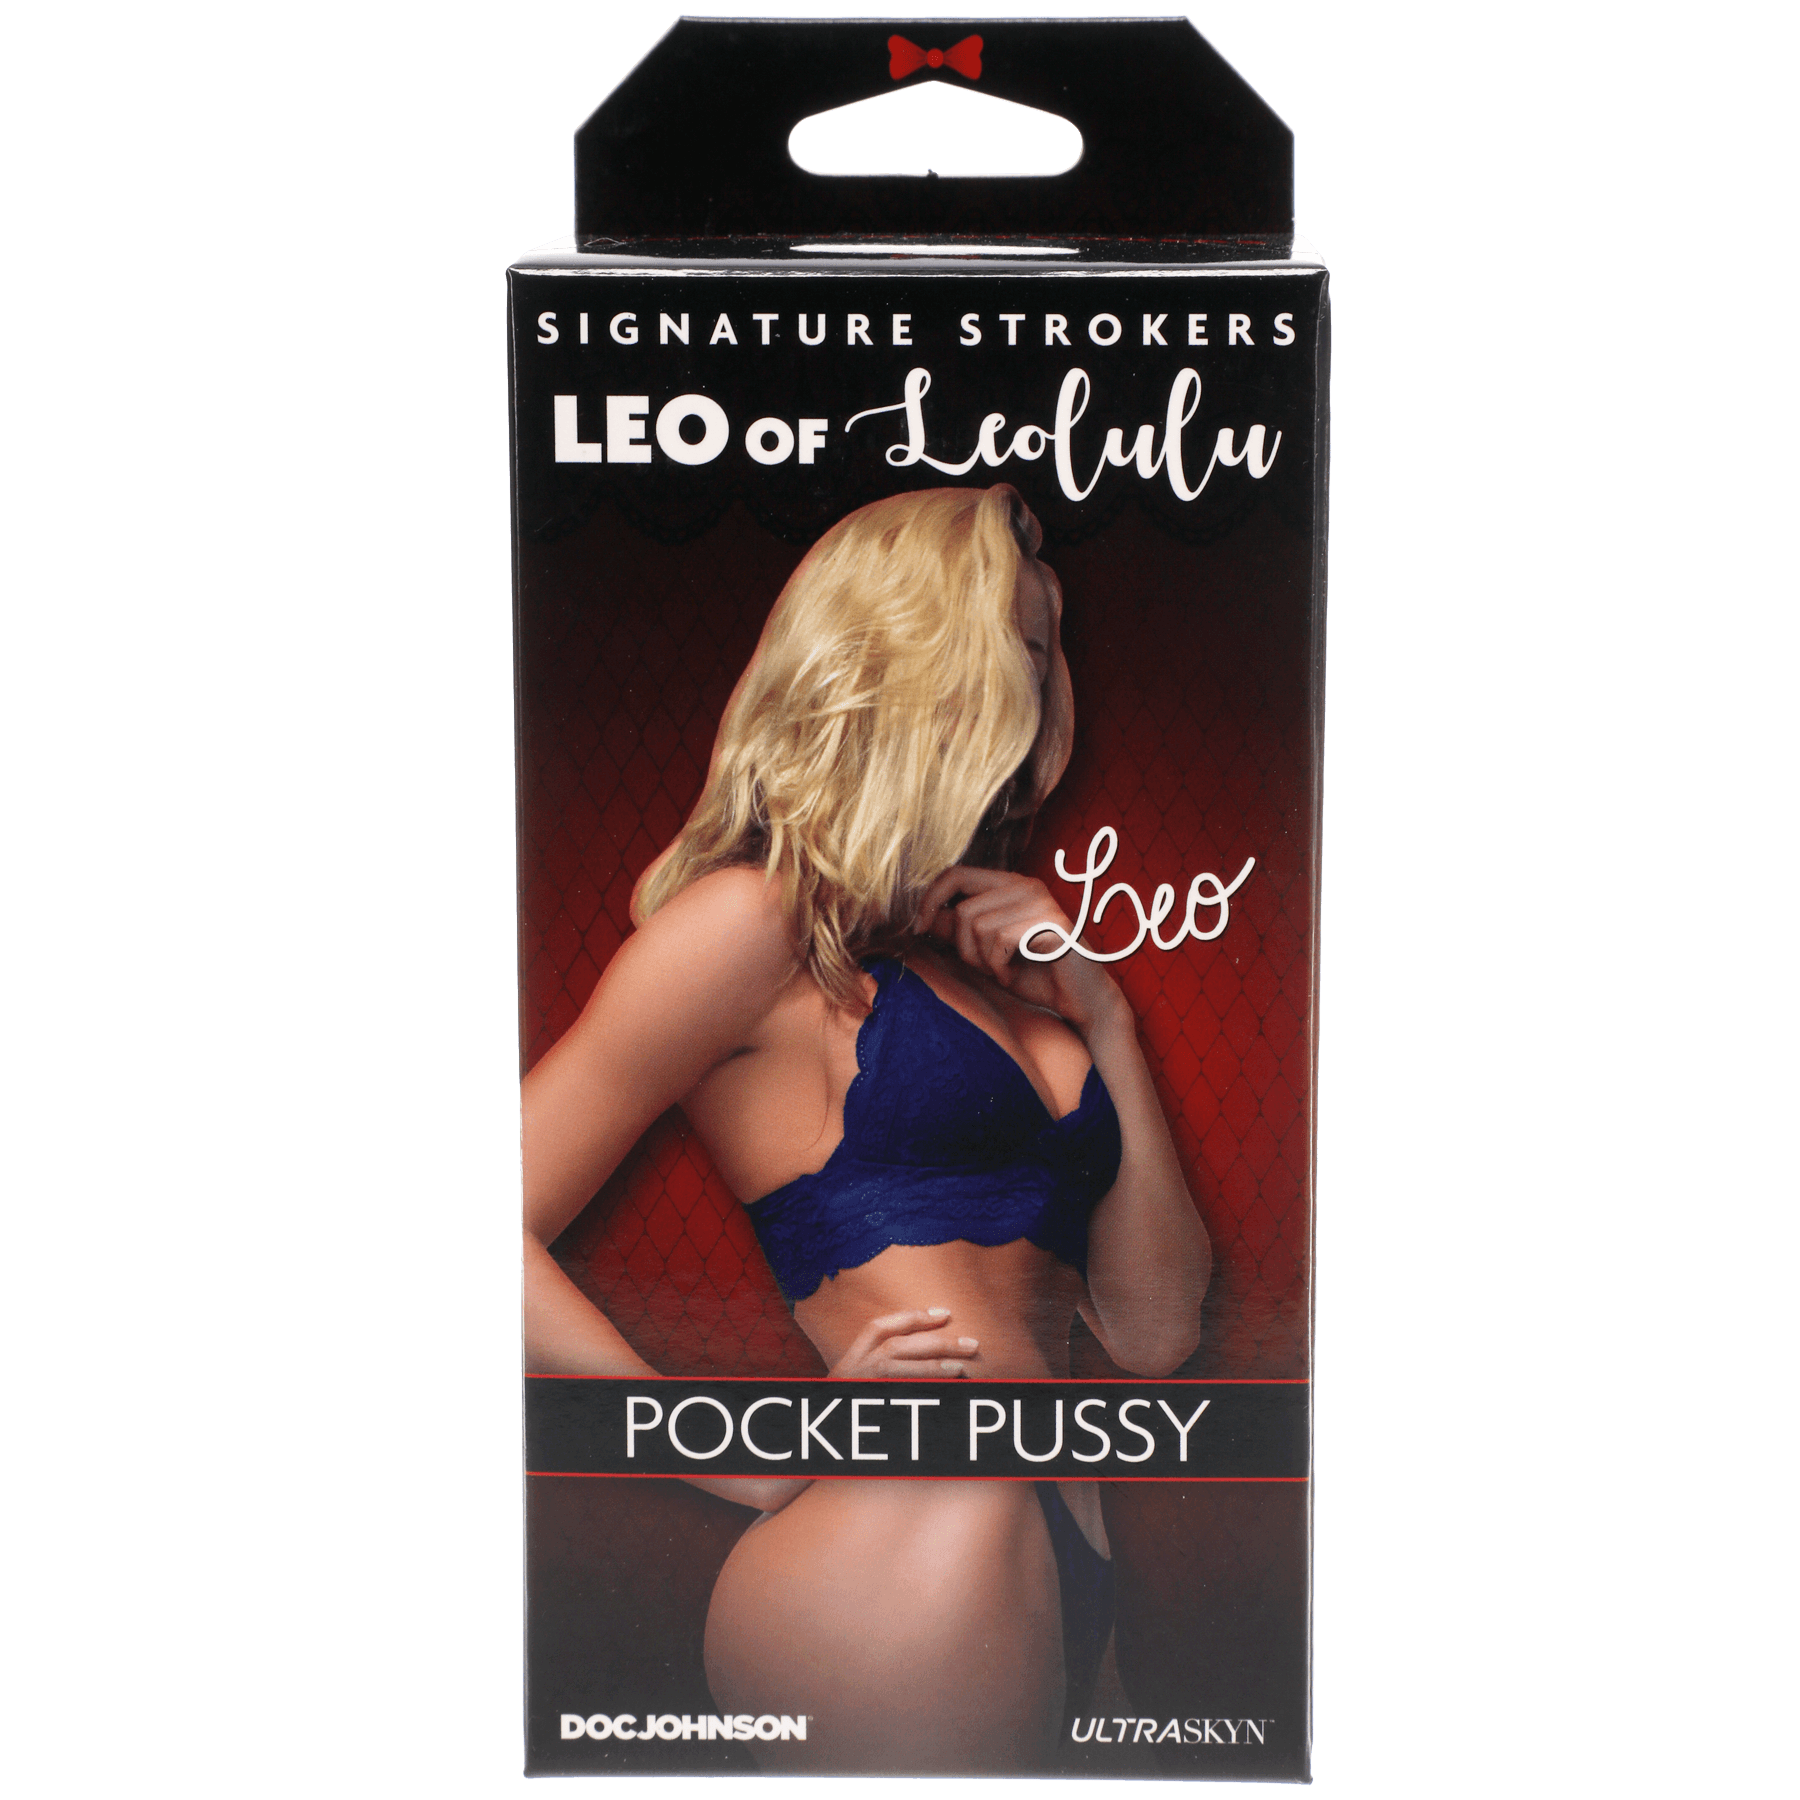 Signature Strokers Leo of LeoLulu - Buy At Luxury Toy X - Free 3-Day Shipping